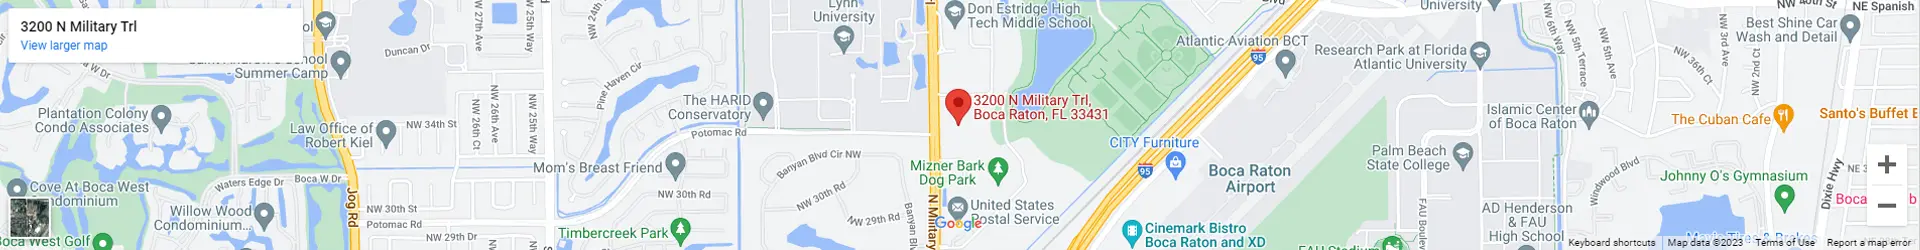 A map of the location of a military training facility.